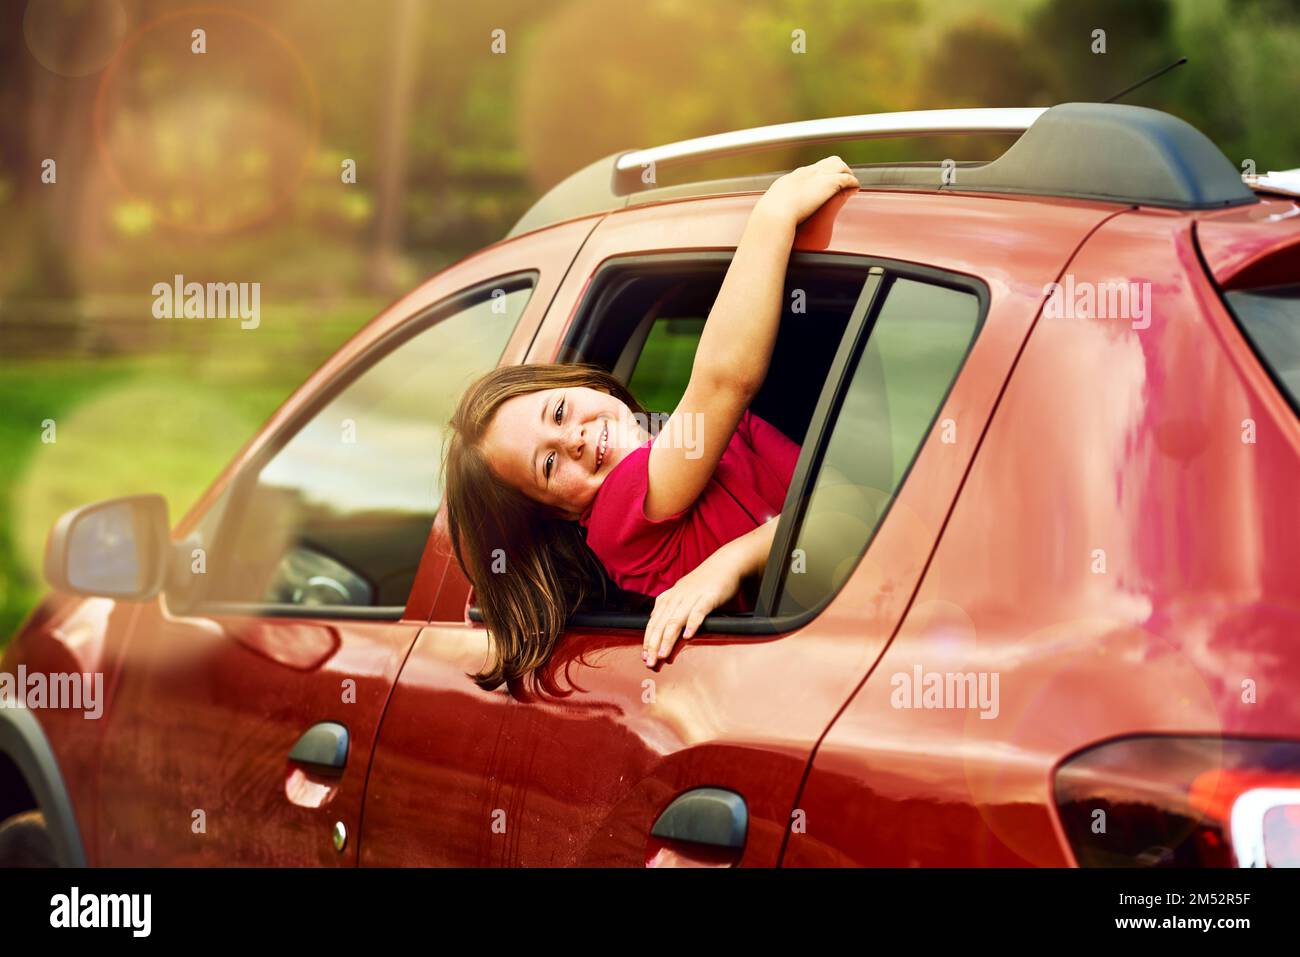 Getting a little restless in the back seat. Portrait of an adorable little girl leaning out of a car window outside. Stock Photo